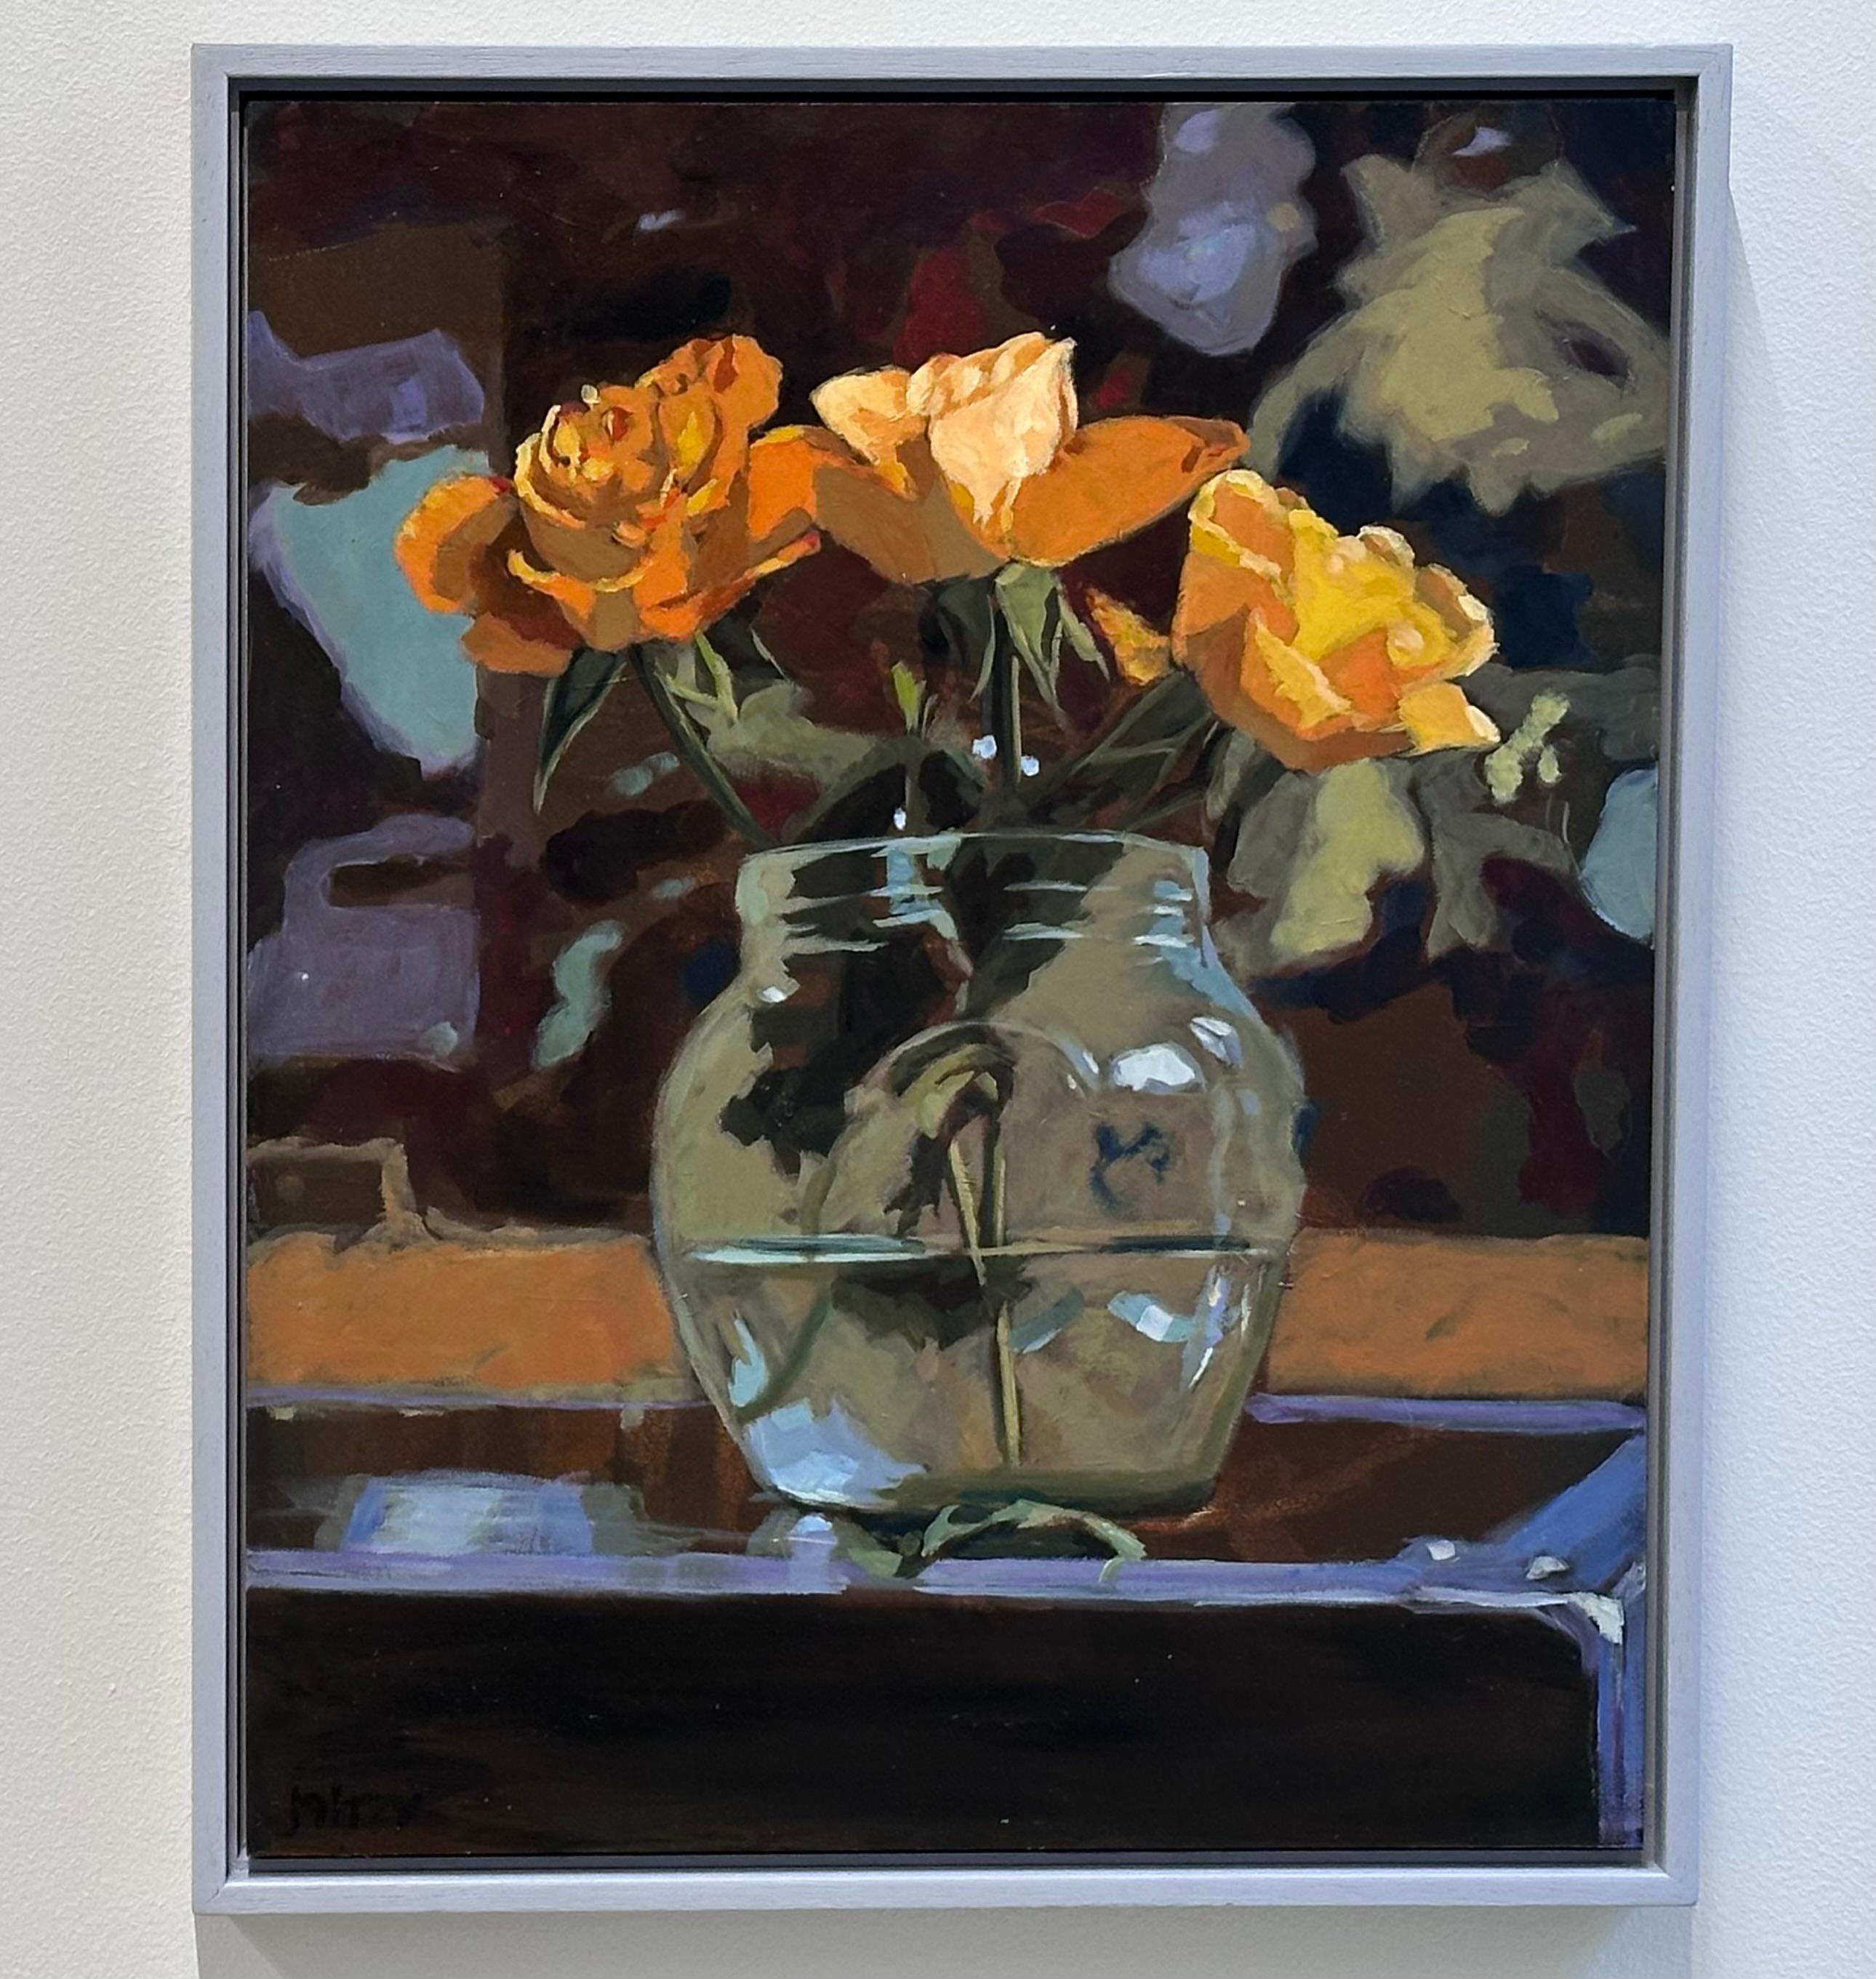 Mitzy Renooy
Yellow Roses
50 x 40 cm
Frame included in price, size with frame: 55 x 45 cm

Dutch artist Mitzy Renooy, a former camera woman for national television, did follow art academy to learn to paint in an own style. Her education was a great